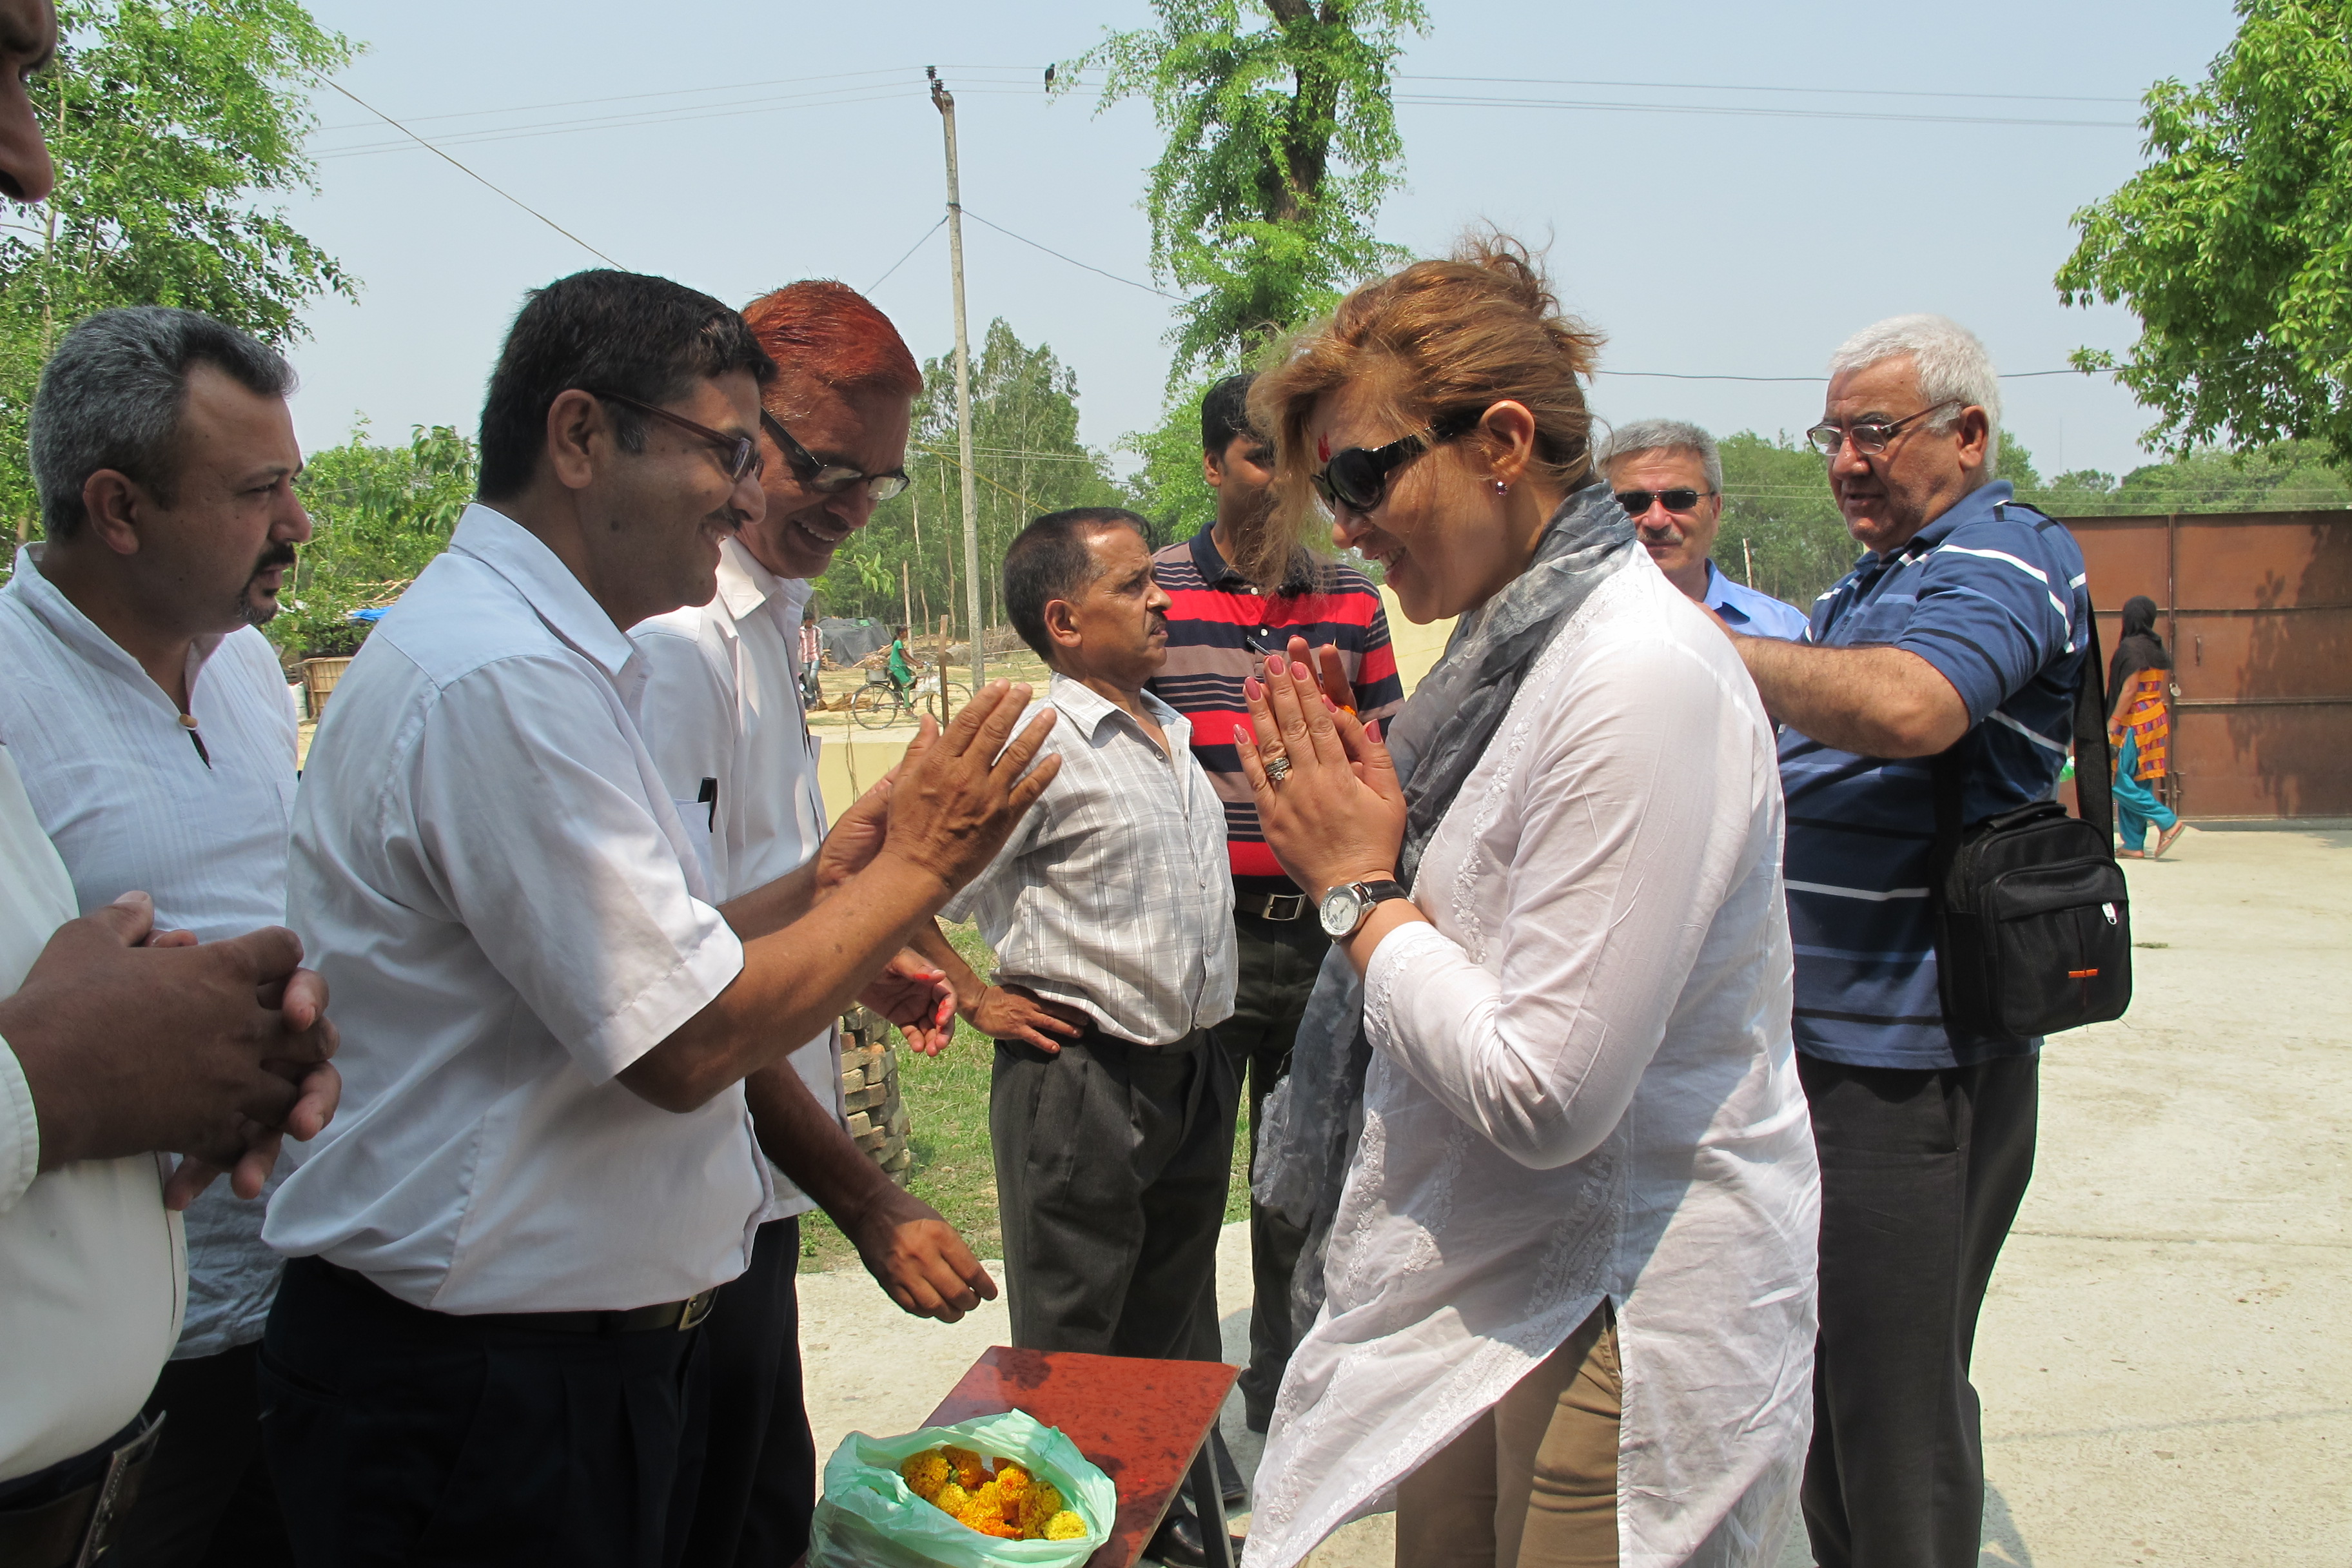 A traditional Nepalese welcome for the Tajik delegates